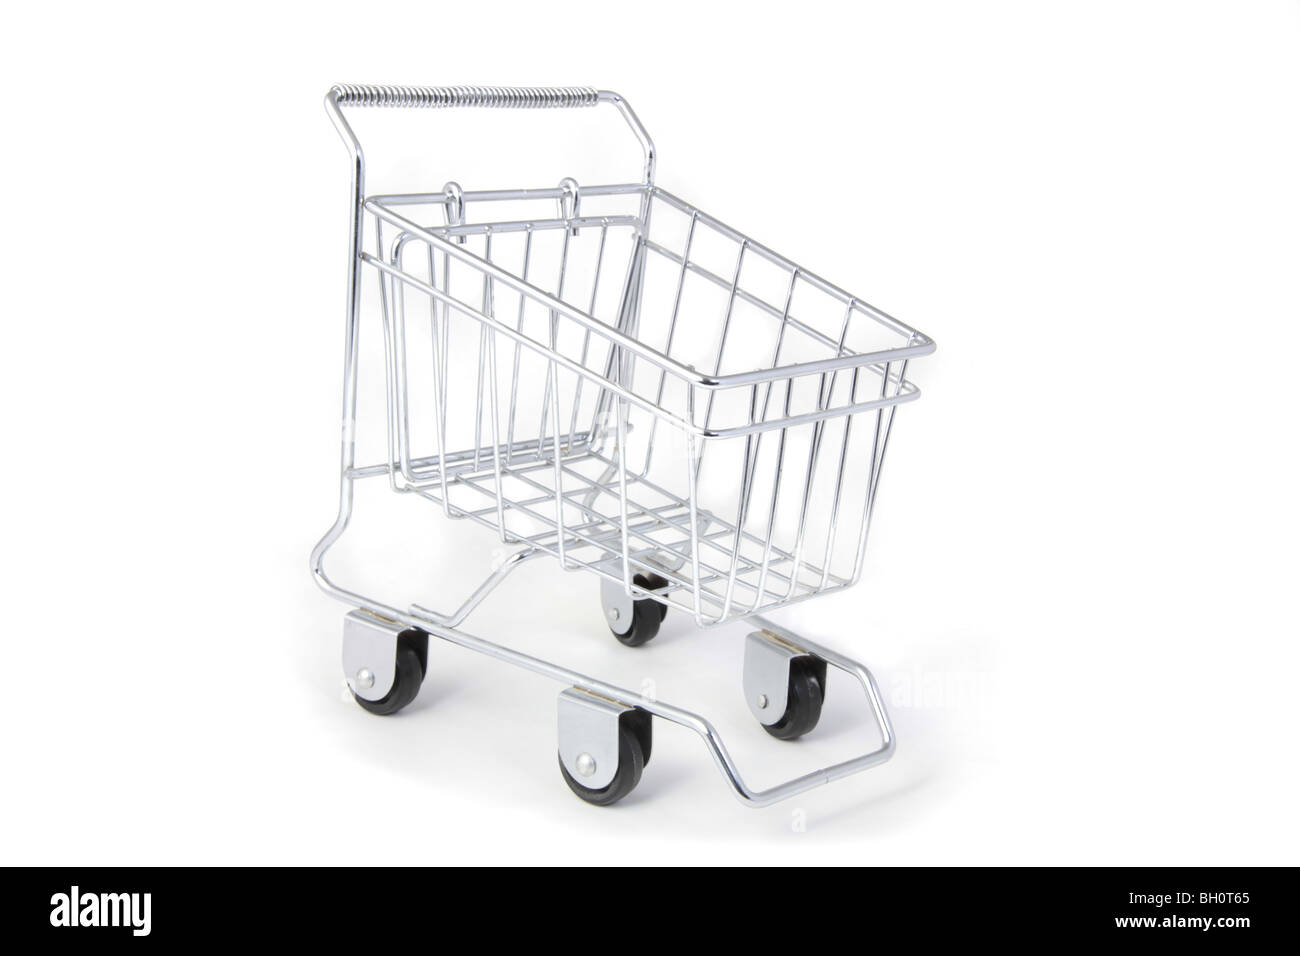 An empty metal shopping cart on wheels isolated on white background. Stock Photo